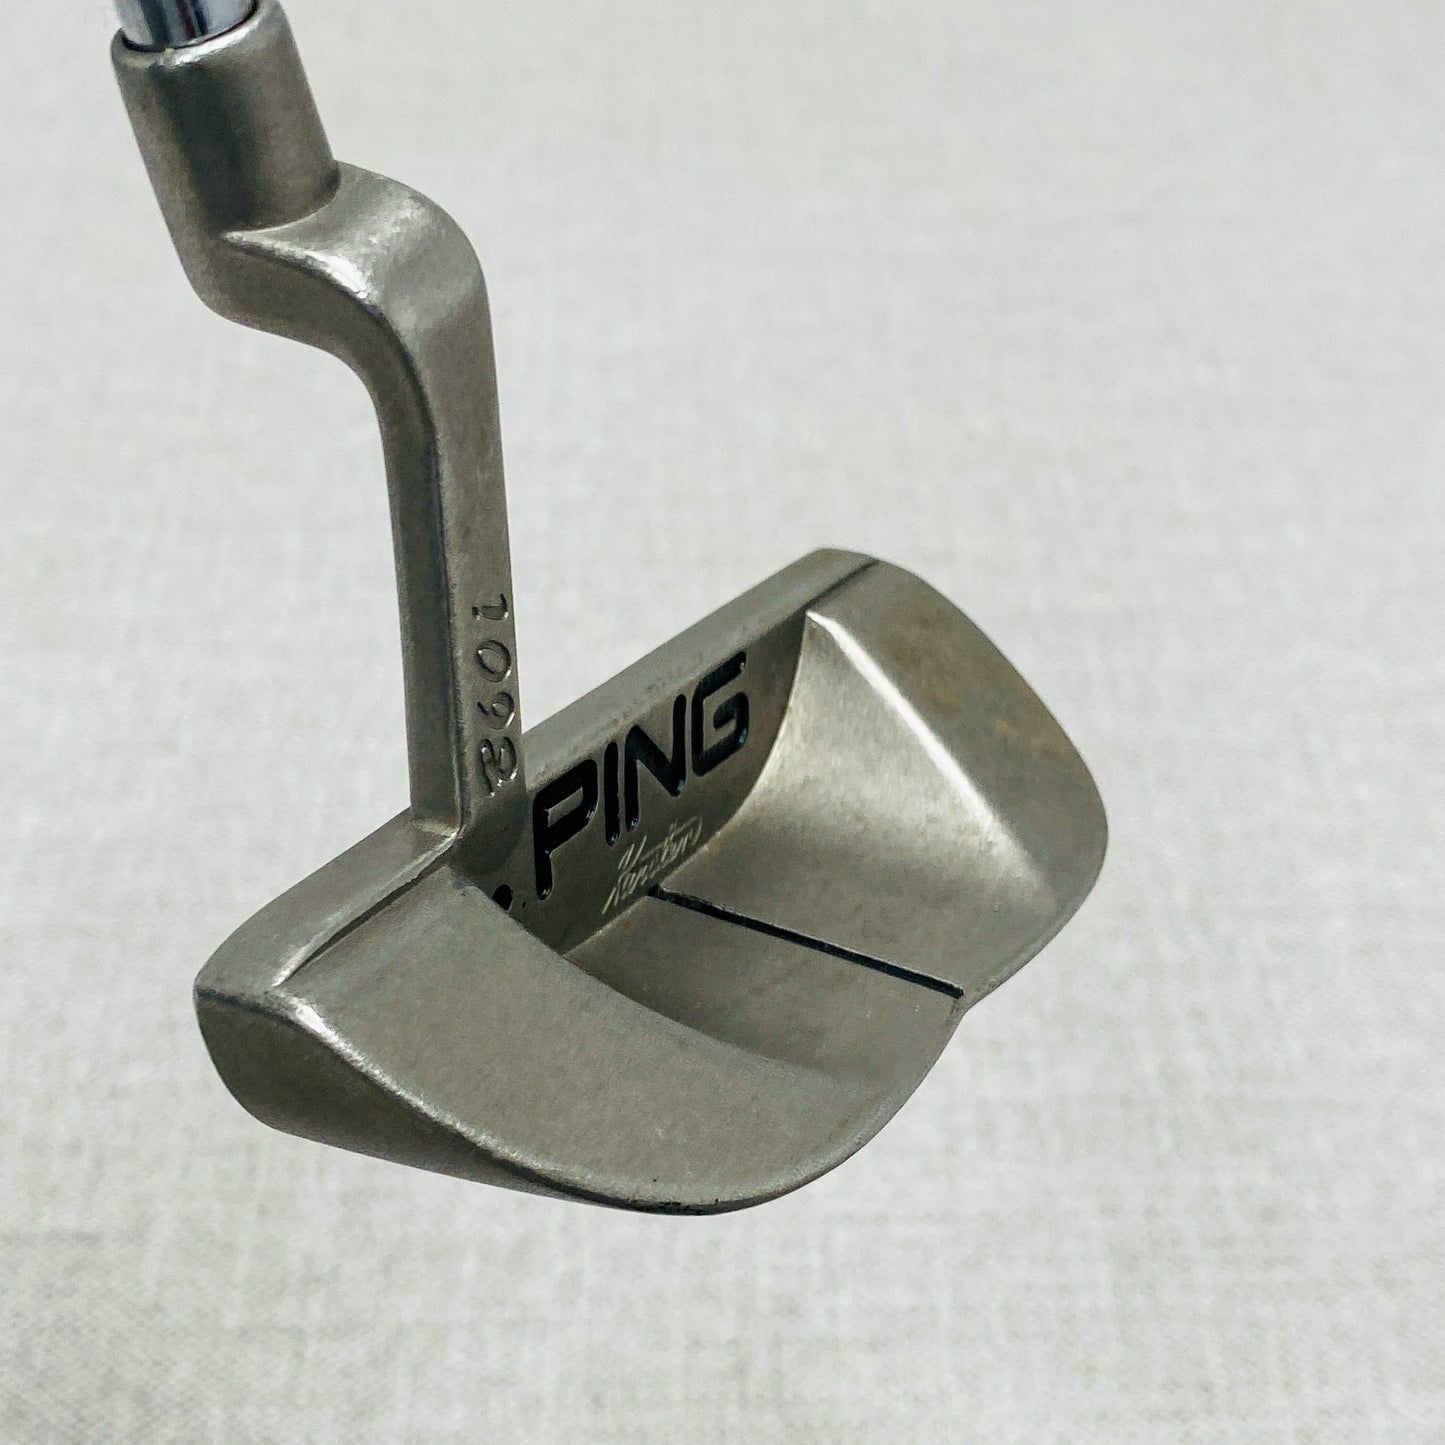 PING B60i Putter. 33 inch - Very Good Condition # T1007